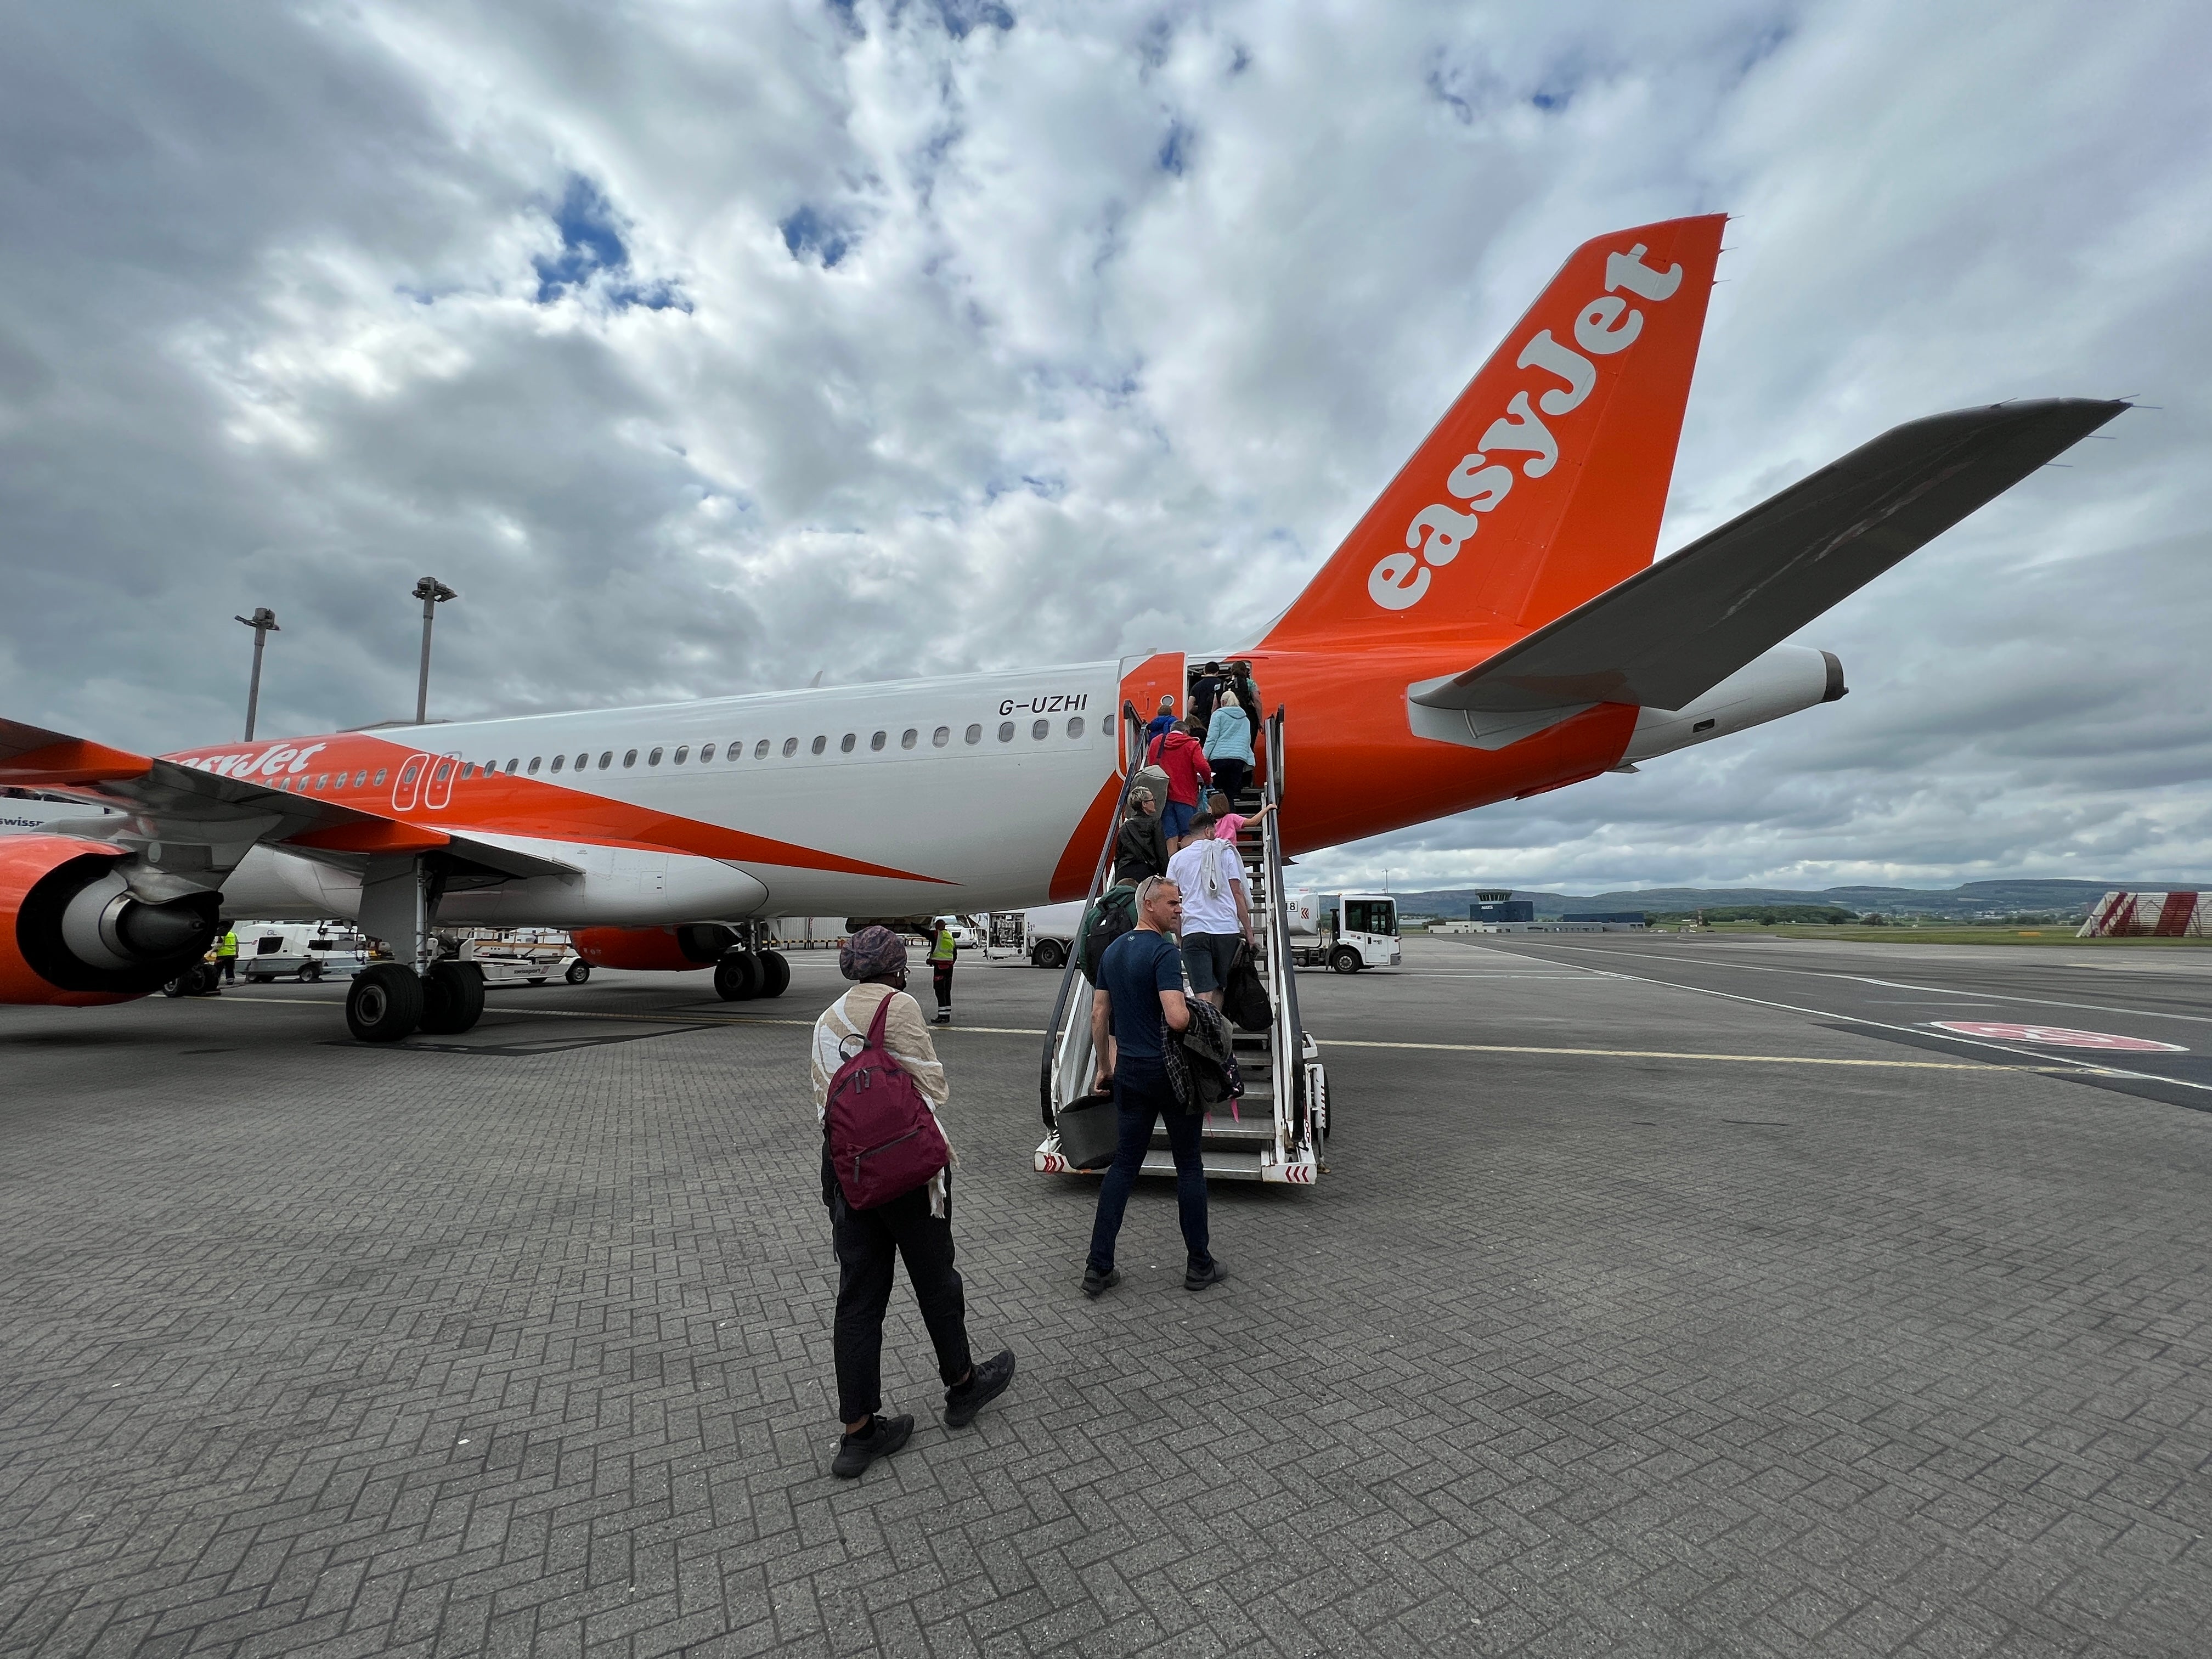 EasyJet cancelled 240 flights between Saturday and 6 June